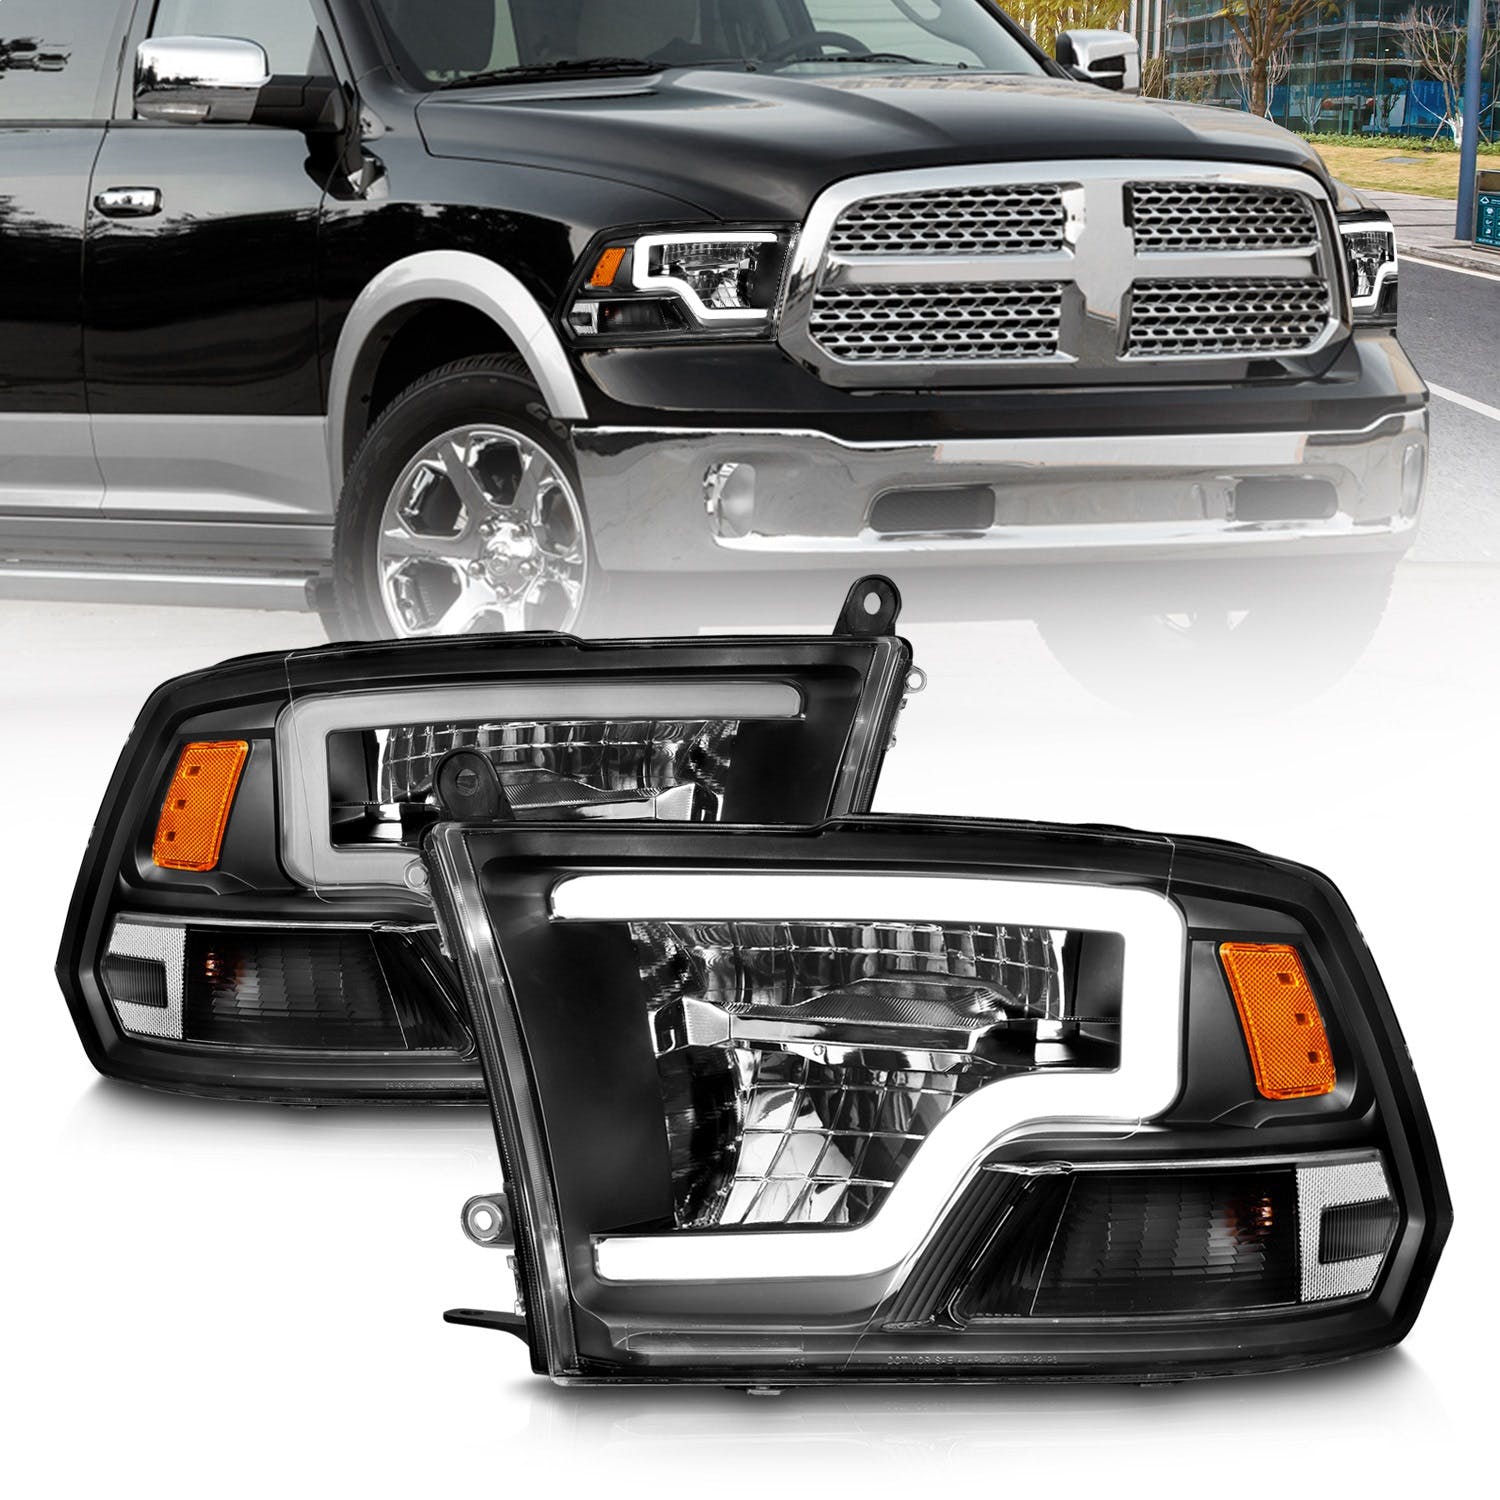 AnzoUSA 111539 Full LED Square Projector Headlights with Light Bar Chrome Housing